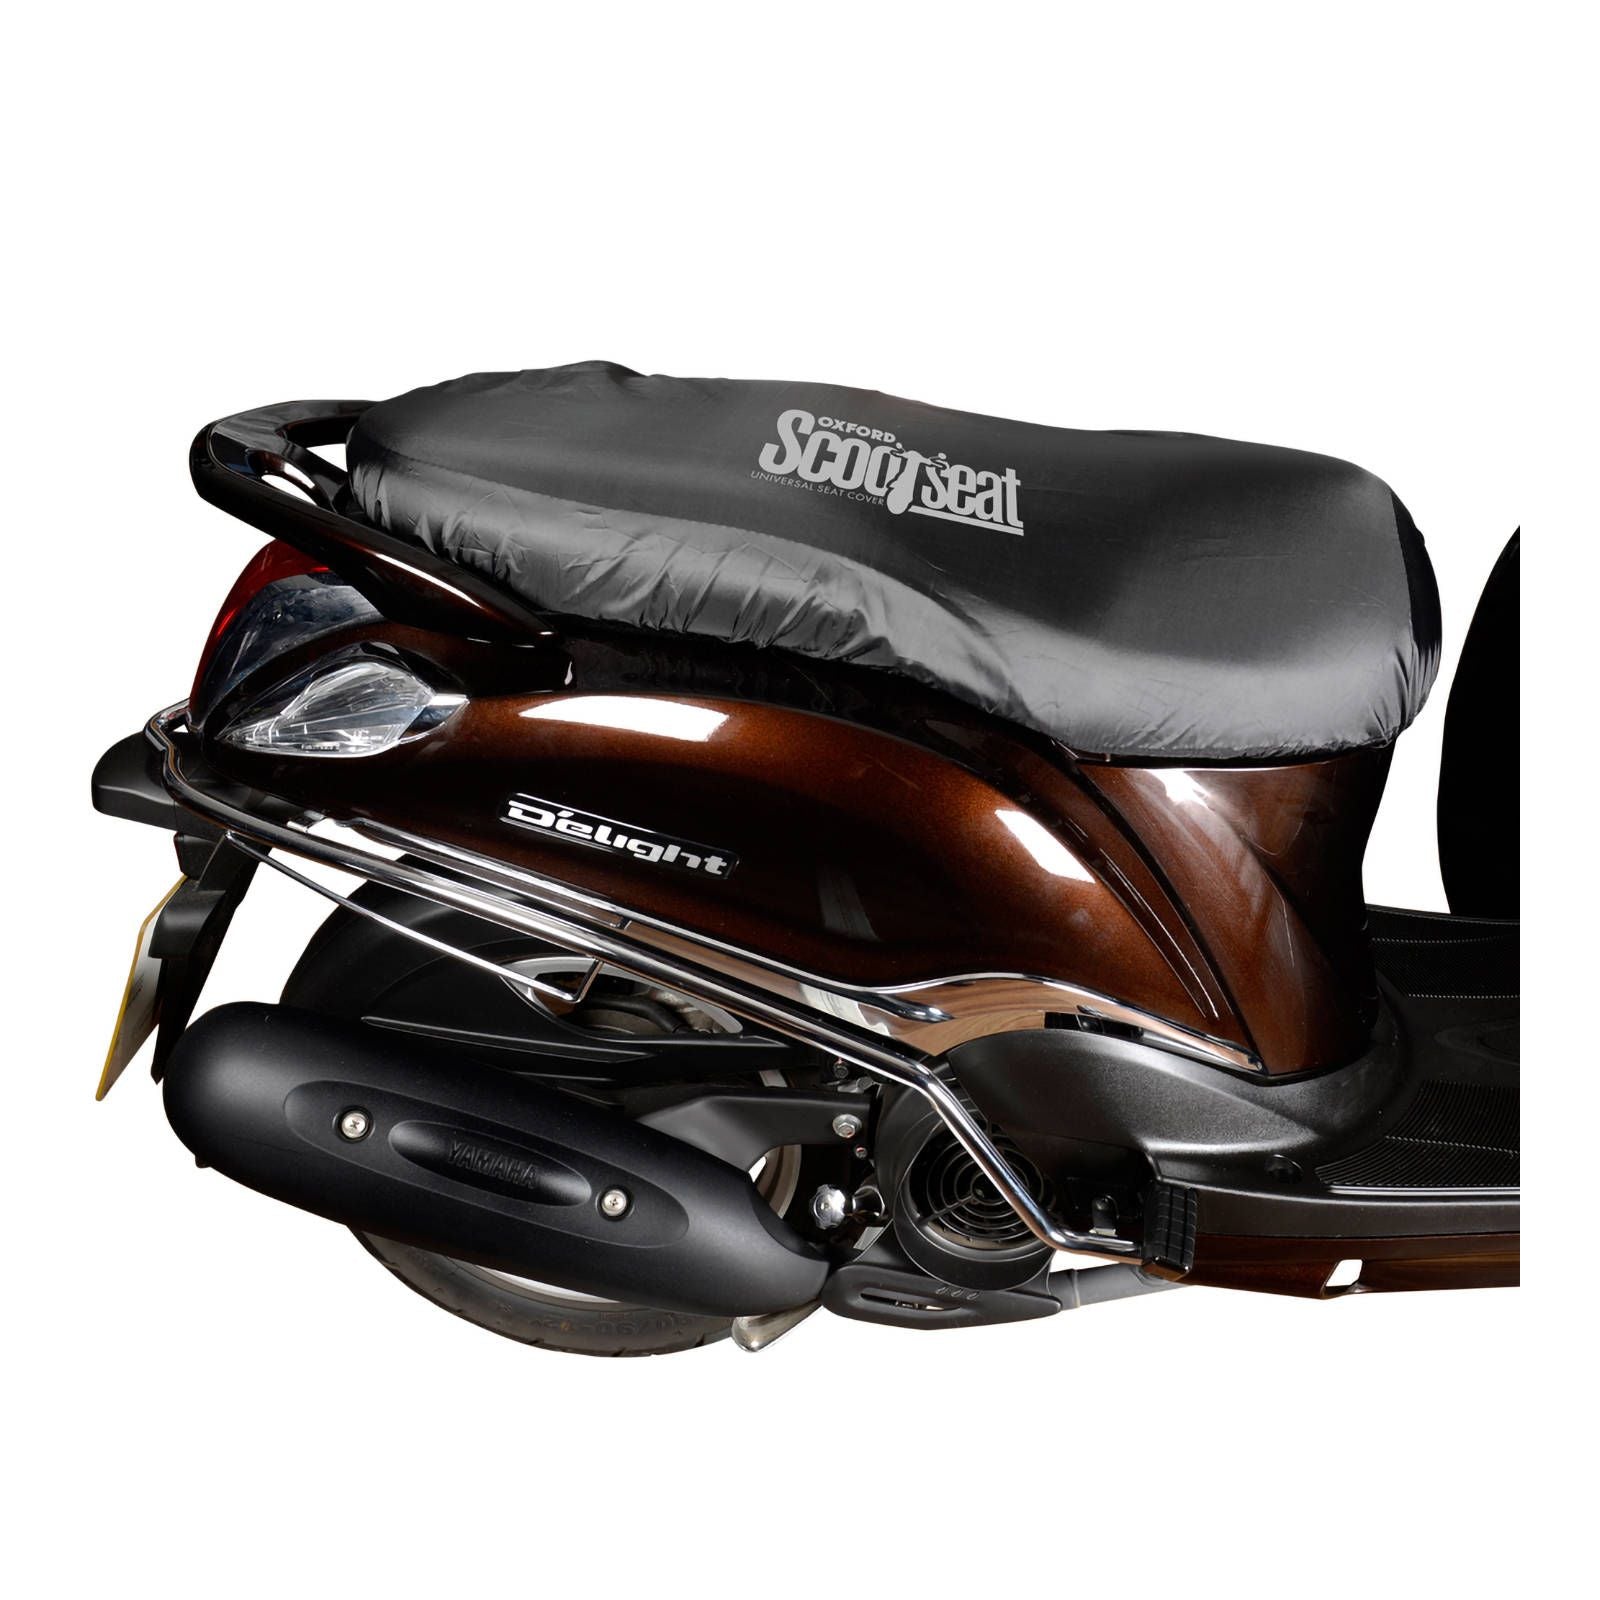 New OXFORD Aquatex Scooter WP Seat Cover - Large #OXCV187